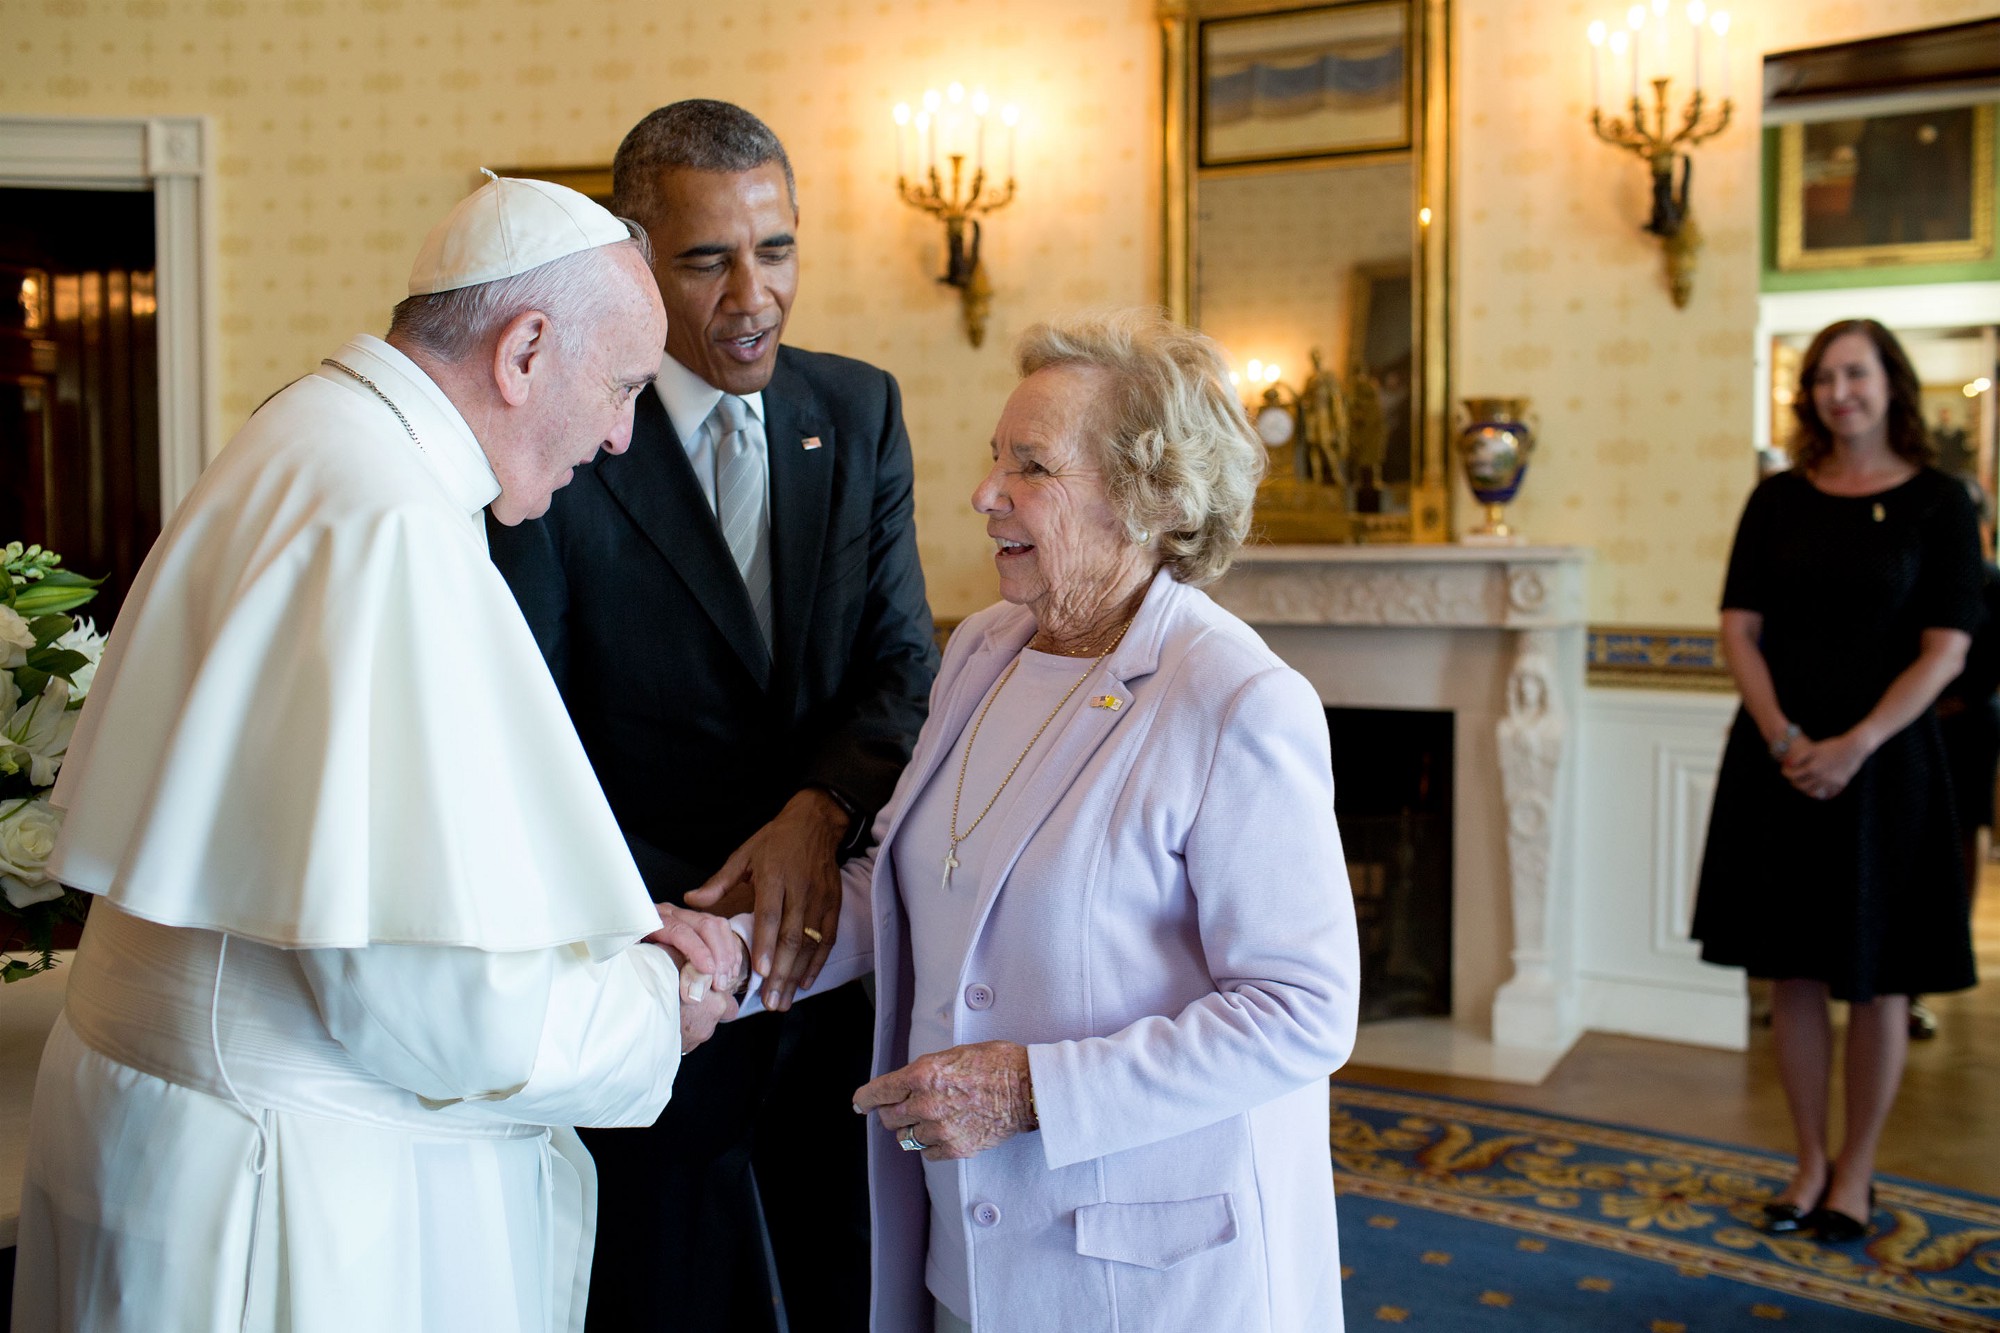 President Obama introduces Pope Francis to Ethel Kennedy. (Official White House Photo by Pete Souza)